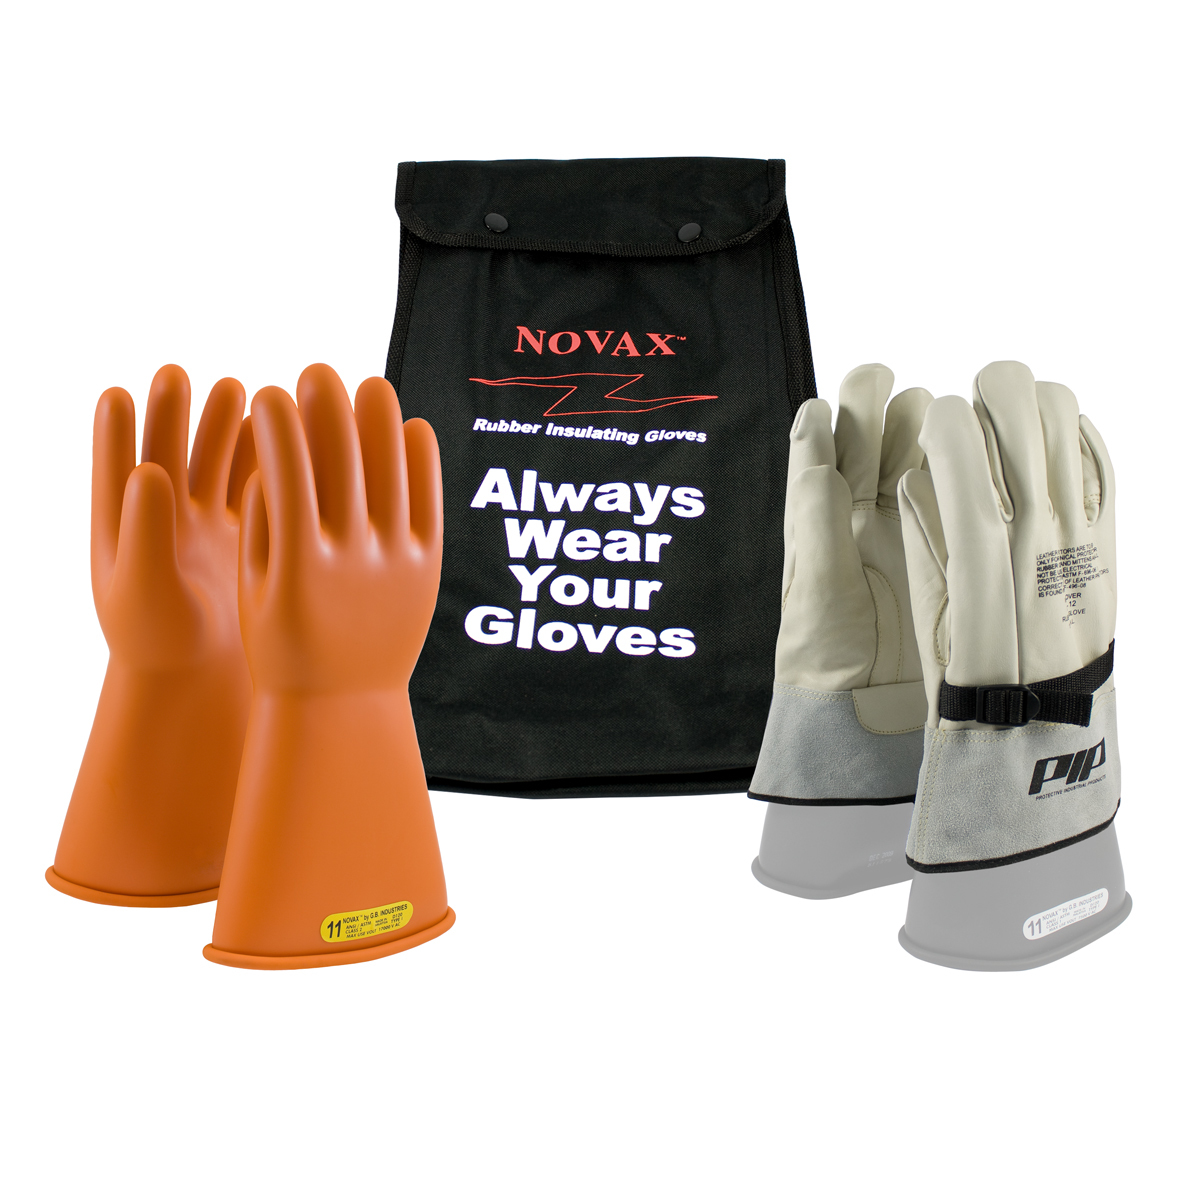 PIP® Size 11 Orange Rubber Class 2 Linesmens Gloves